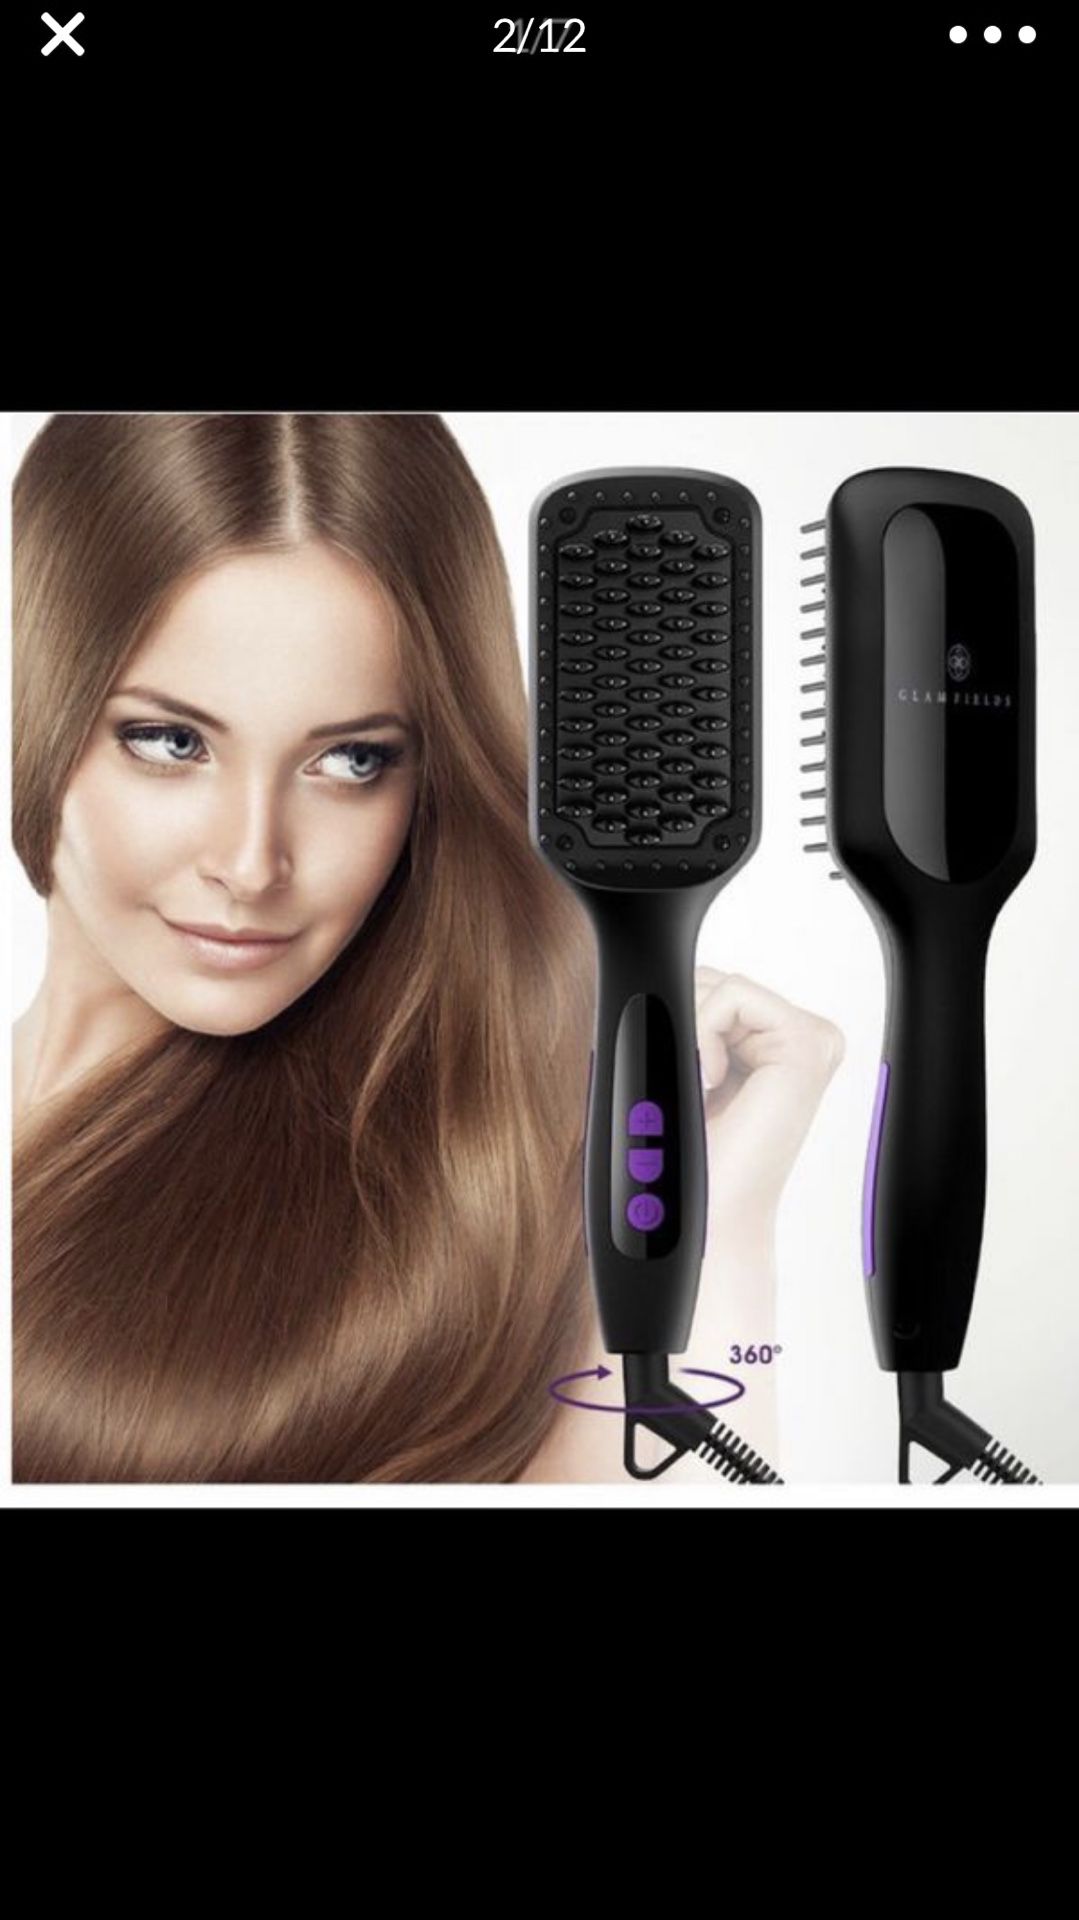 Ionic Hair Straightener Brush, GLAMFIELDS Electrical Heated Irons Hair Straightening with Faster Heating, MCH Ceramic Technology, Auto Temperature